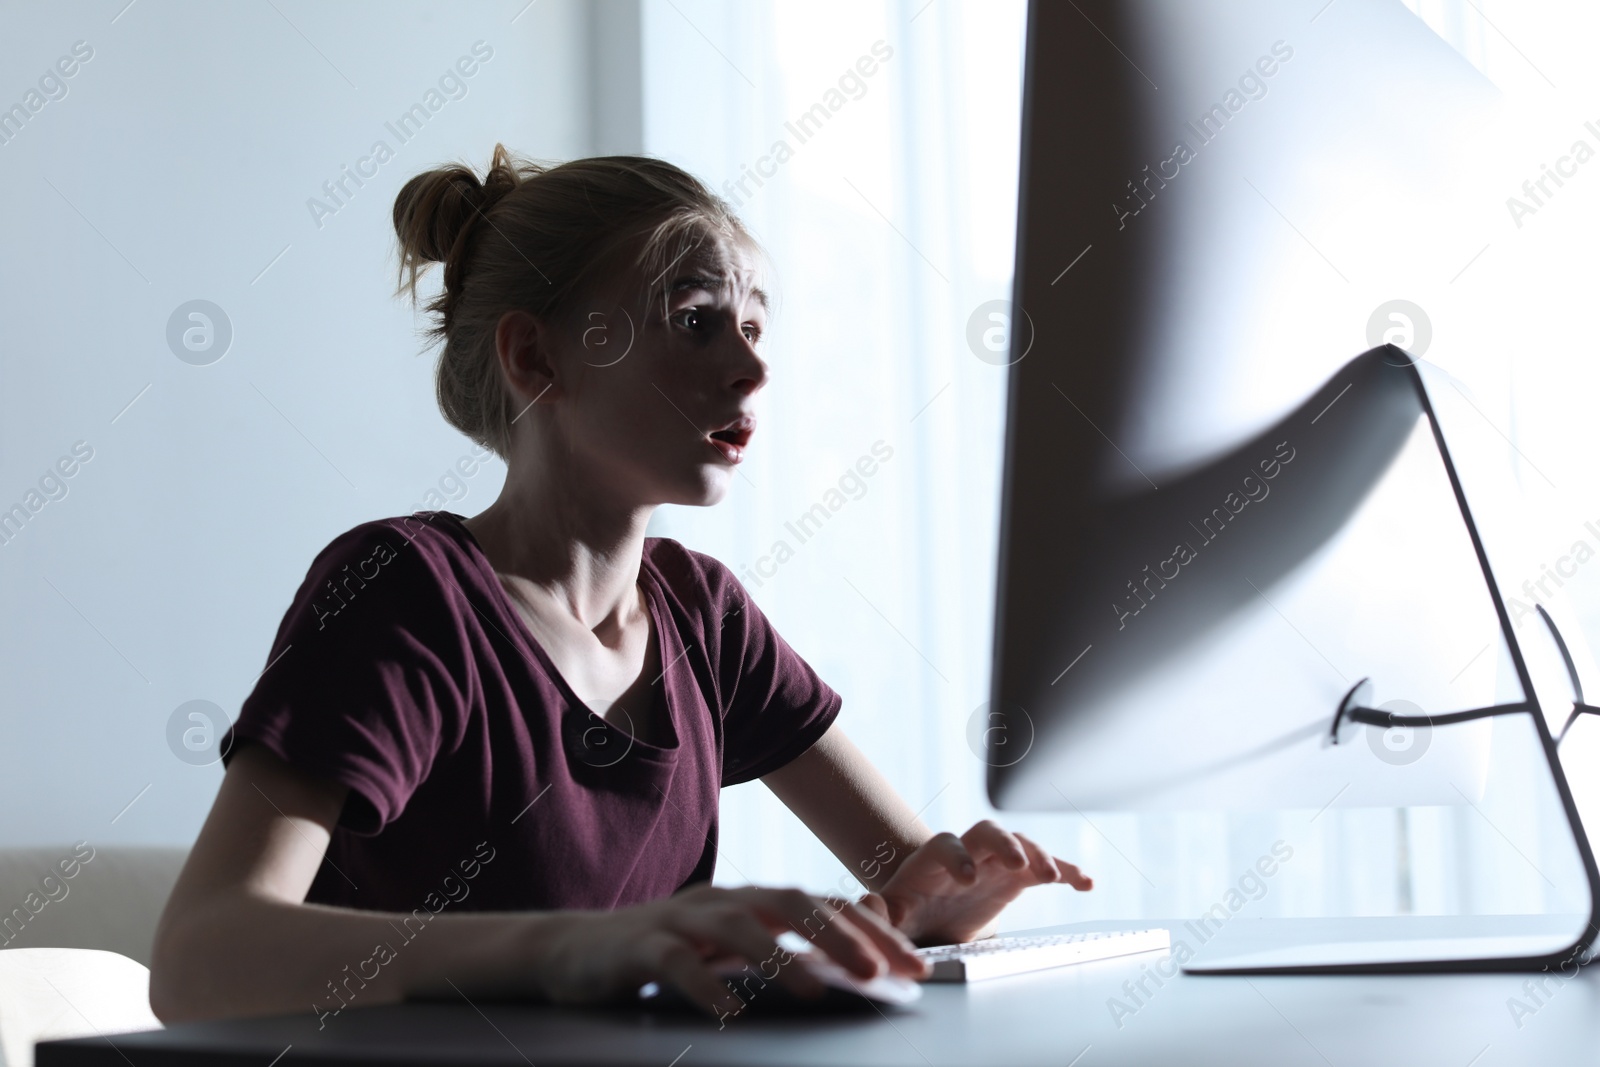 Photo of Shocked teenage girl using computer at table indoors. Danger of internet